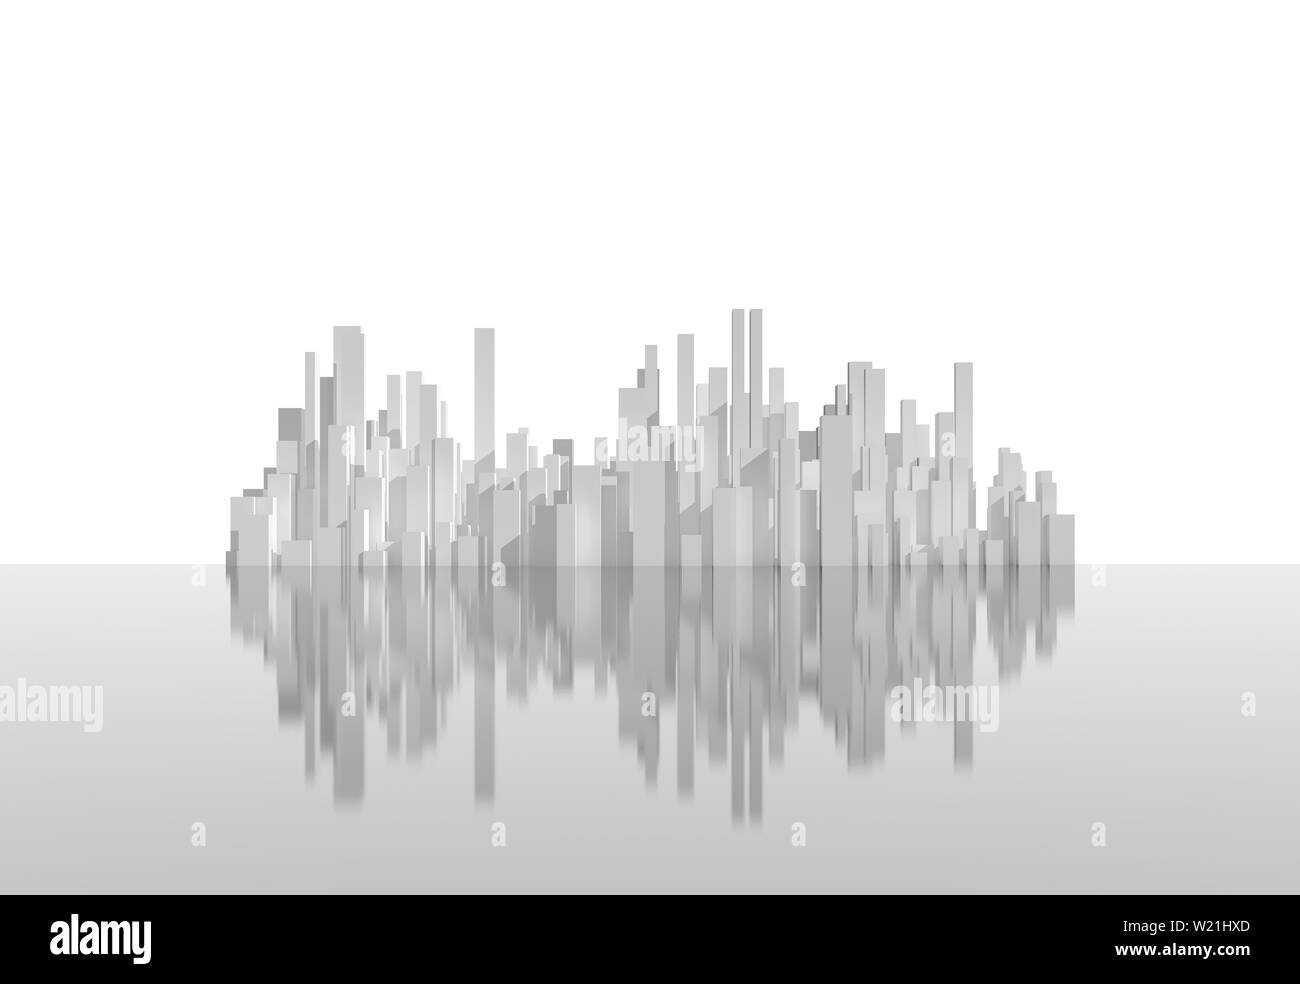 Abstract white city, urban island on shiny gray surface isolated on white background. Digital model with geometric tall skyscrapers, 3d rendering illu Stock Photo